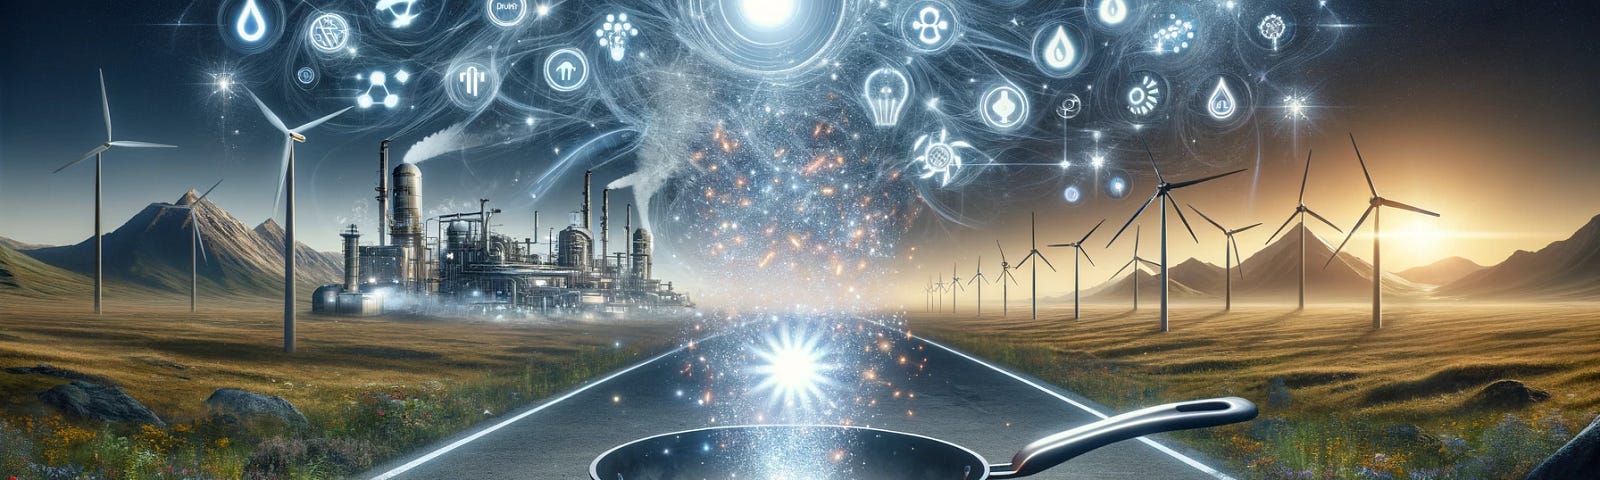 ChatGPT & DALL-E generated panoramic image visualizing the metaphor ‘Flash in the Pan’ as it relates to hydrogen energy technologies. This scene creatively represents the concept with a blend of old-fashioned and futuristic elements.